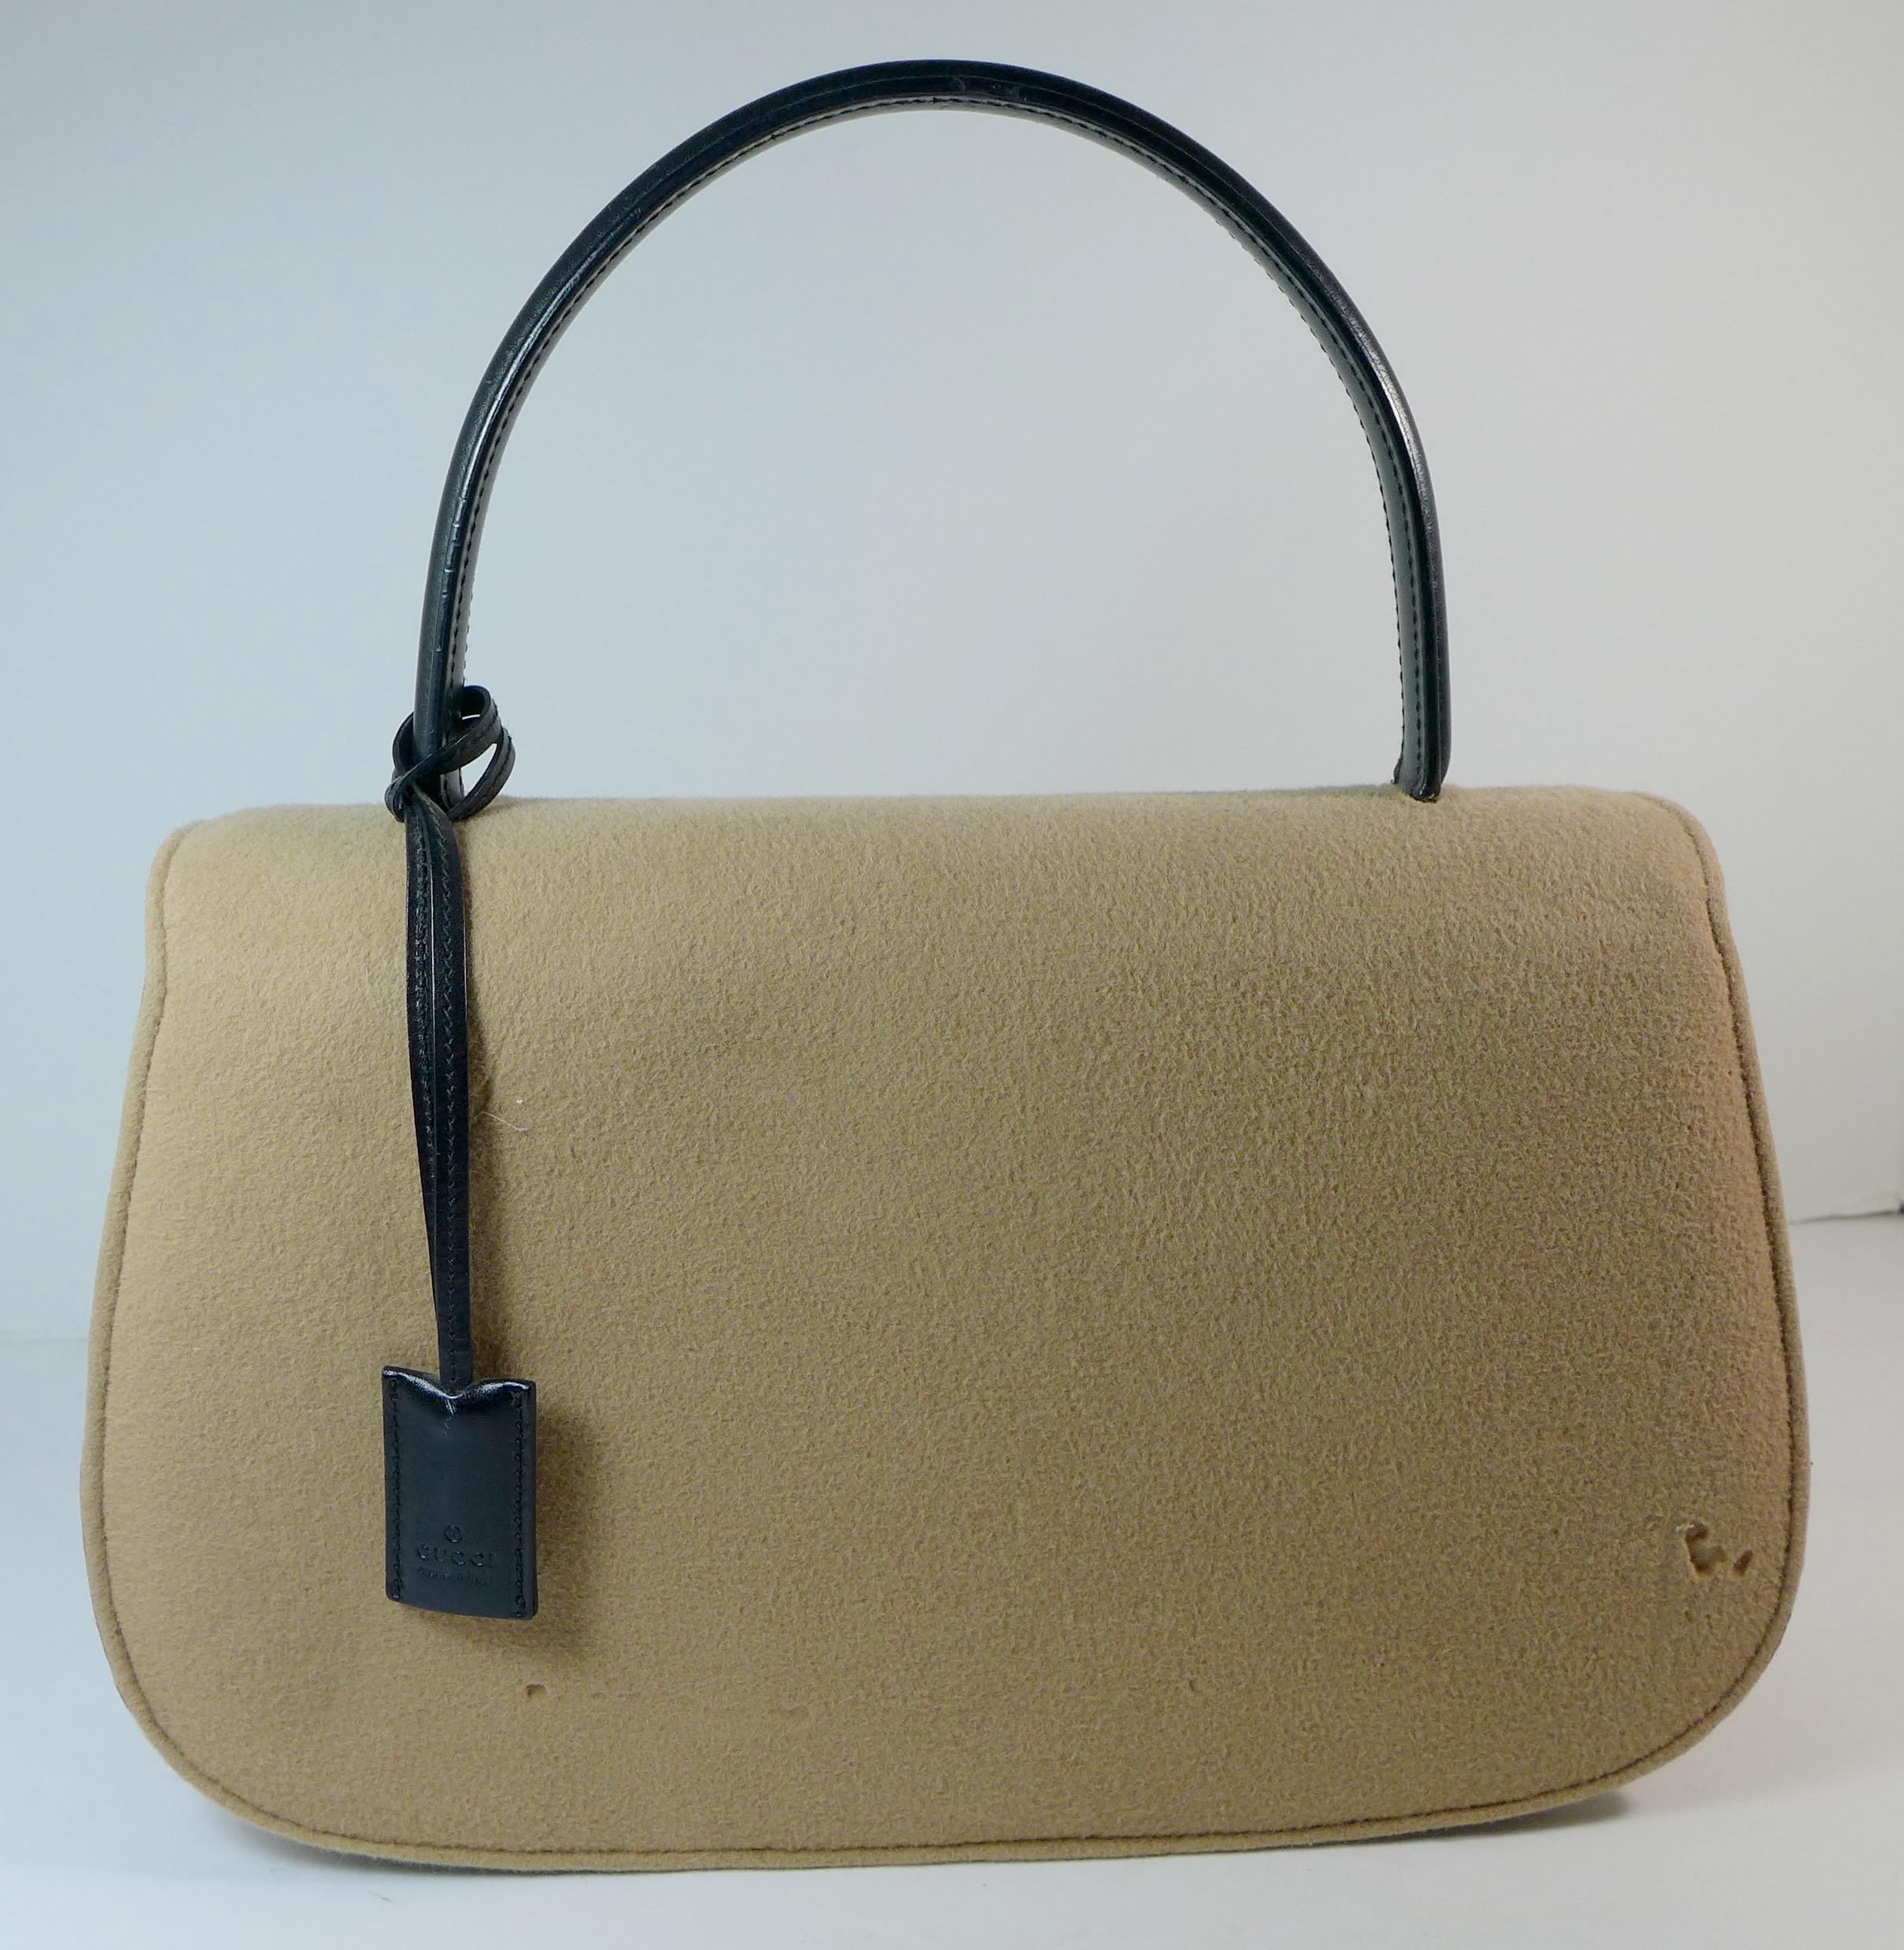 GUCCI Tan Wool Purse In Good Condition For Sale In Los Angeles, CA